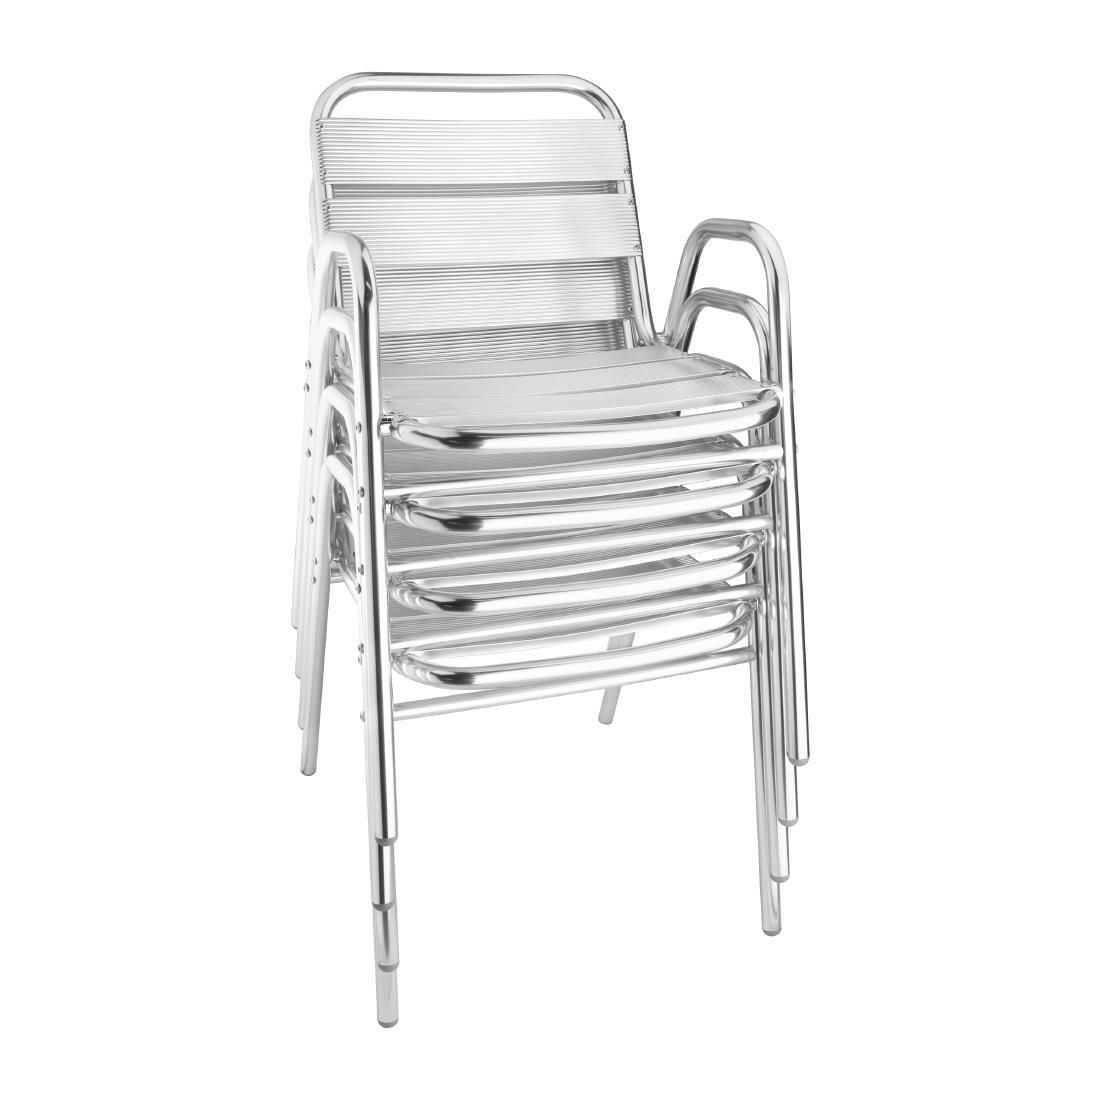 Bolero Aluminium Stacking Chairs Arched Arms (Pack of 4) - U501  - 4